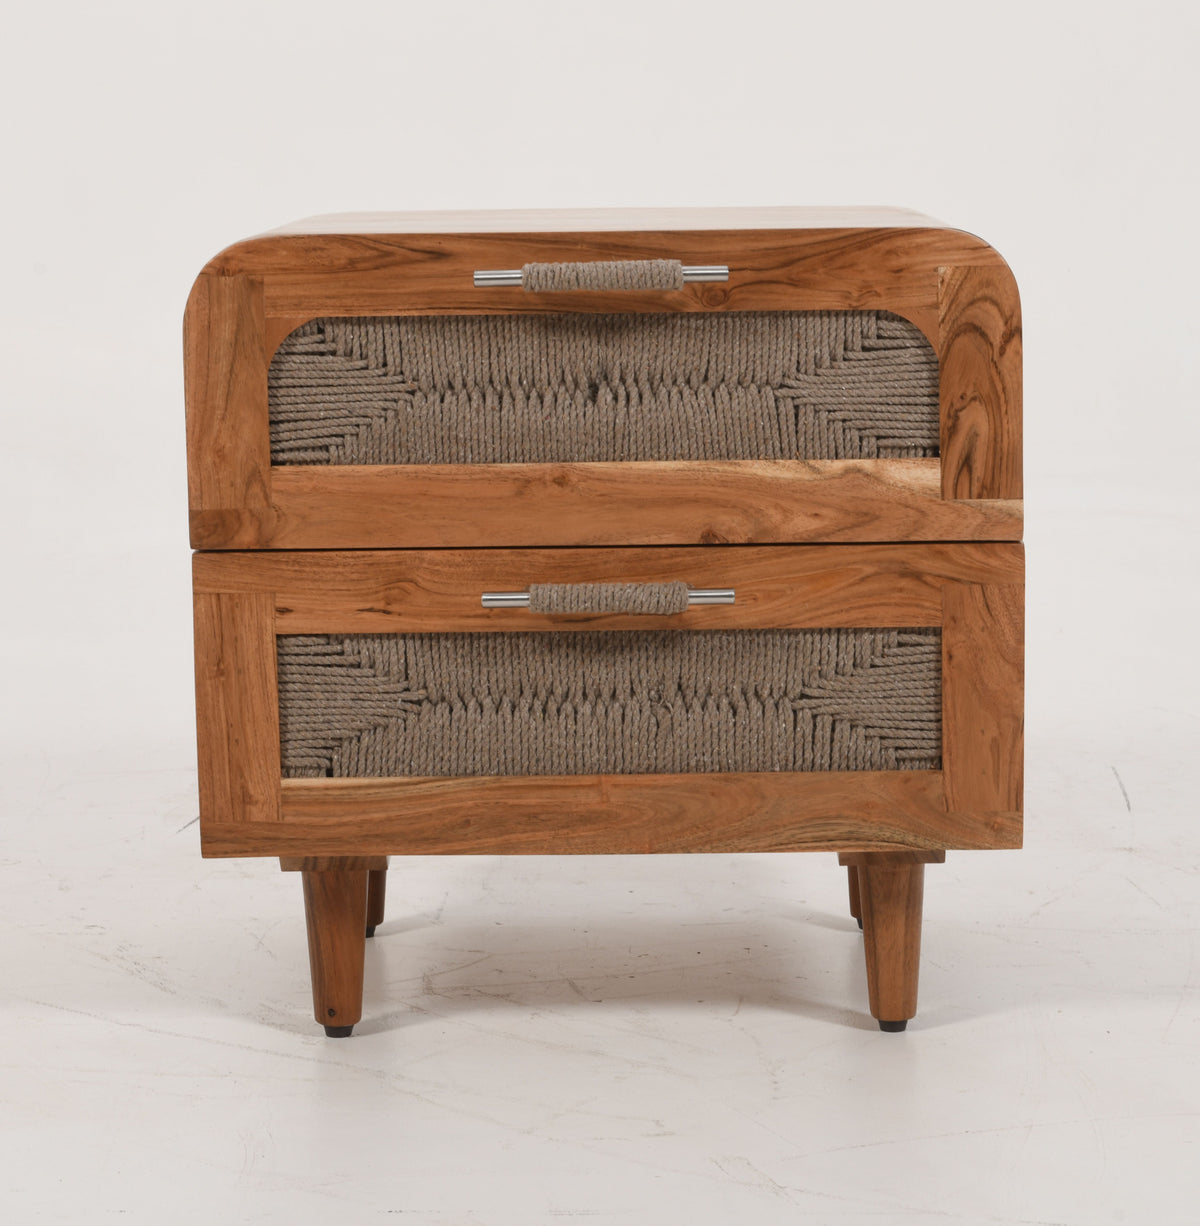 Kota 2 Drawer Bedside Cabinet Table - Solid Acacia Wood &amp; Handwoven Cord